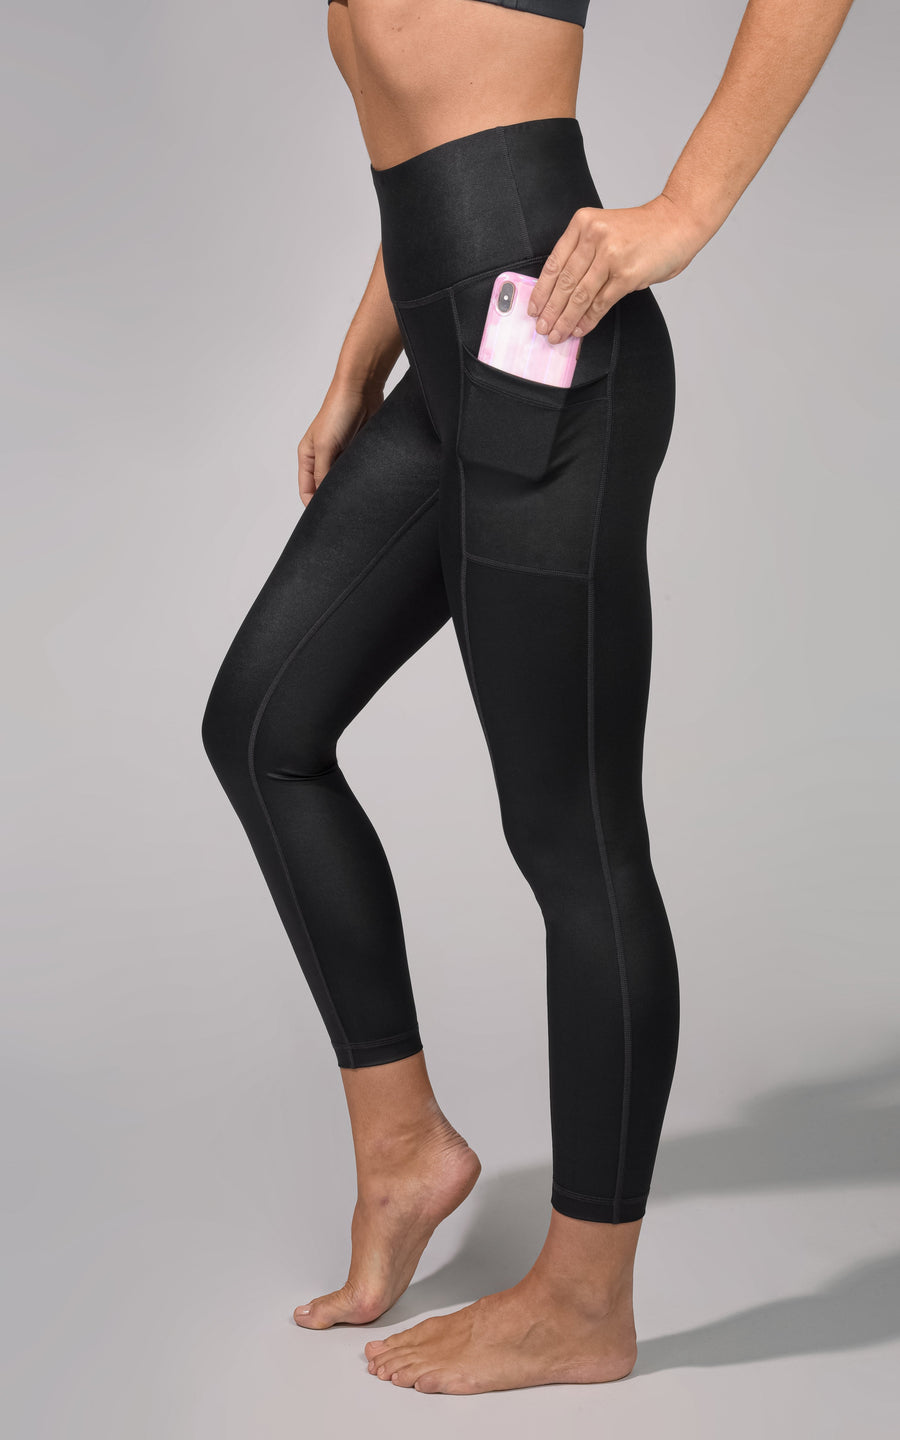 Power Flex Basic Legging With Reflective Legs For Cycling – Lille Pige